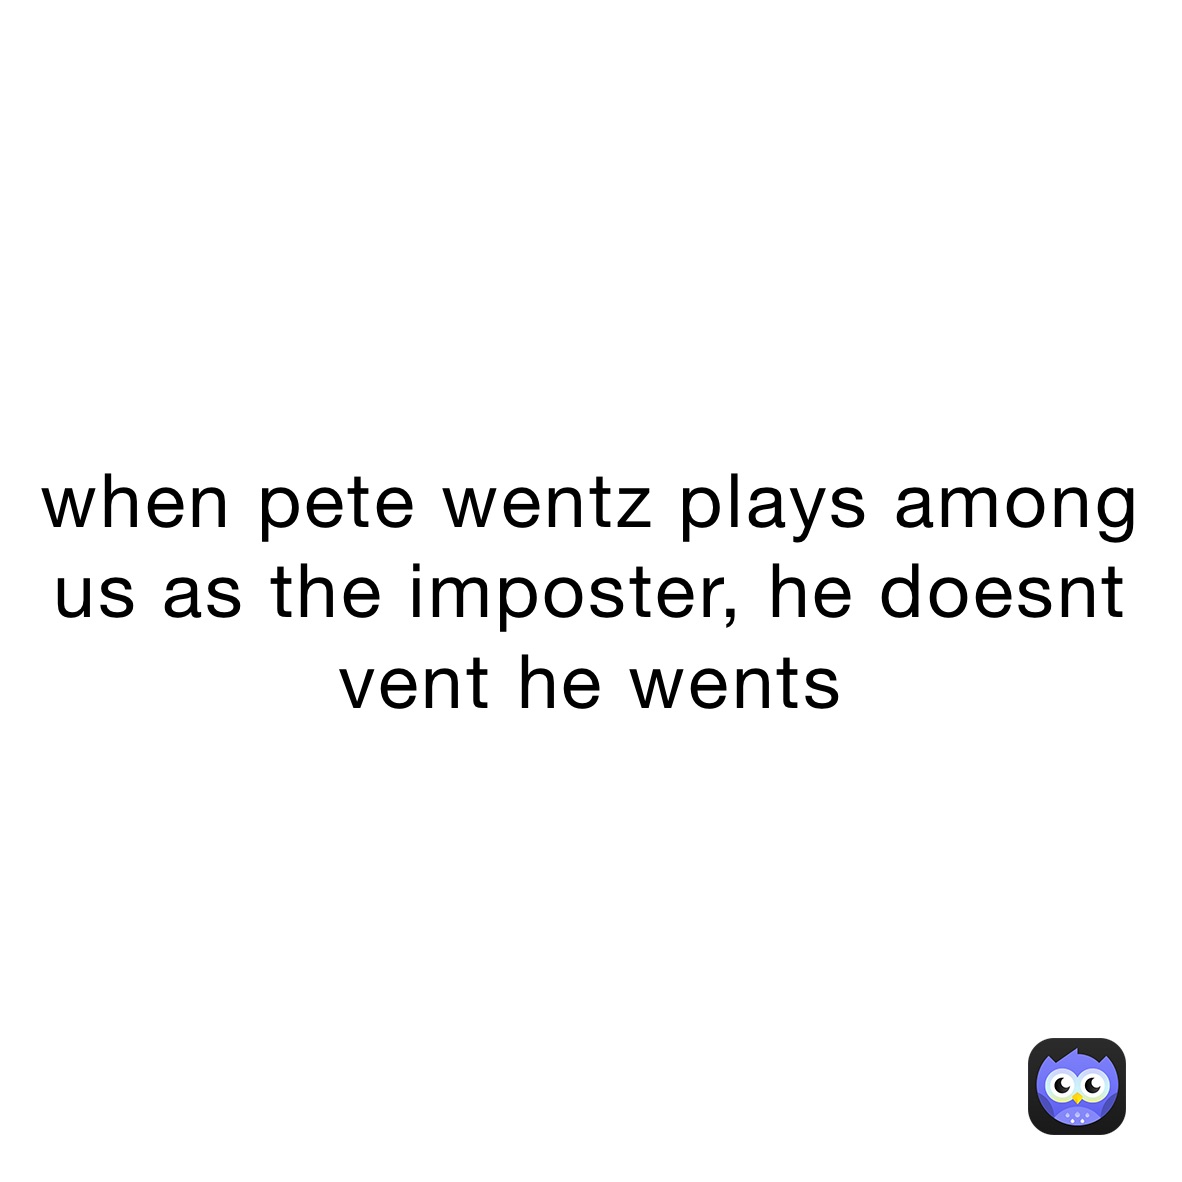 when pete wentz plays among us as the imposter, he doesnt vent he wents